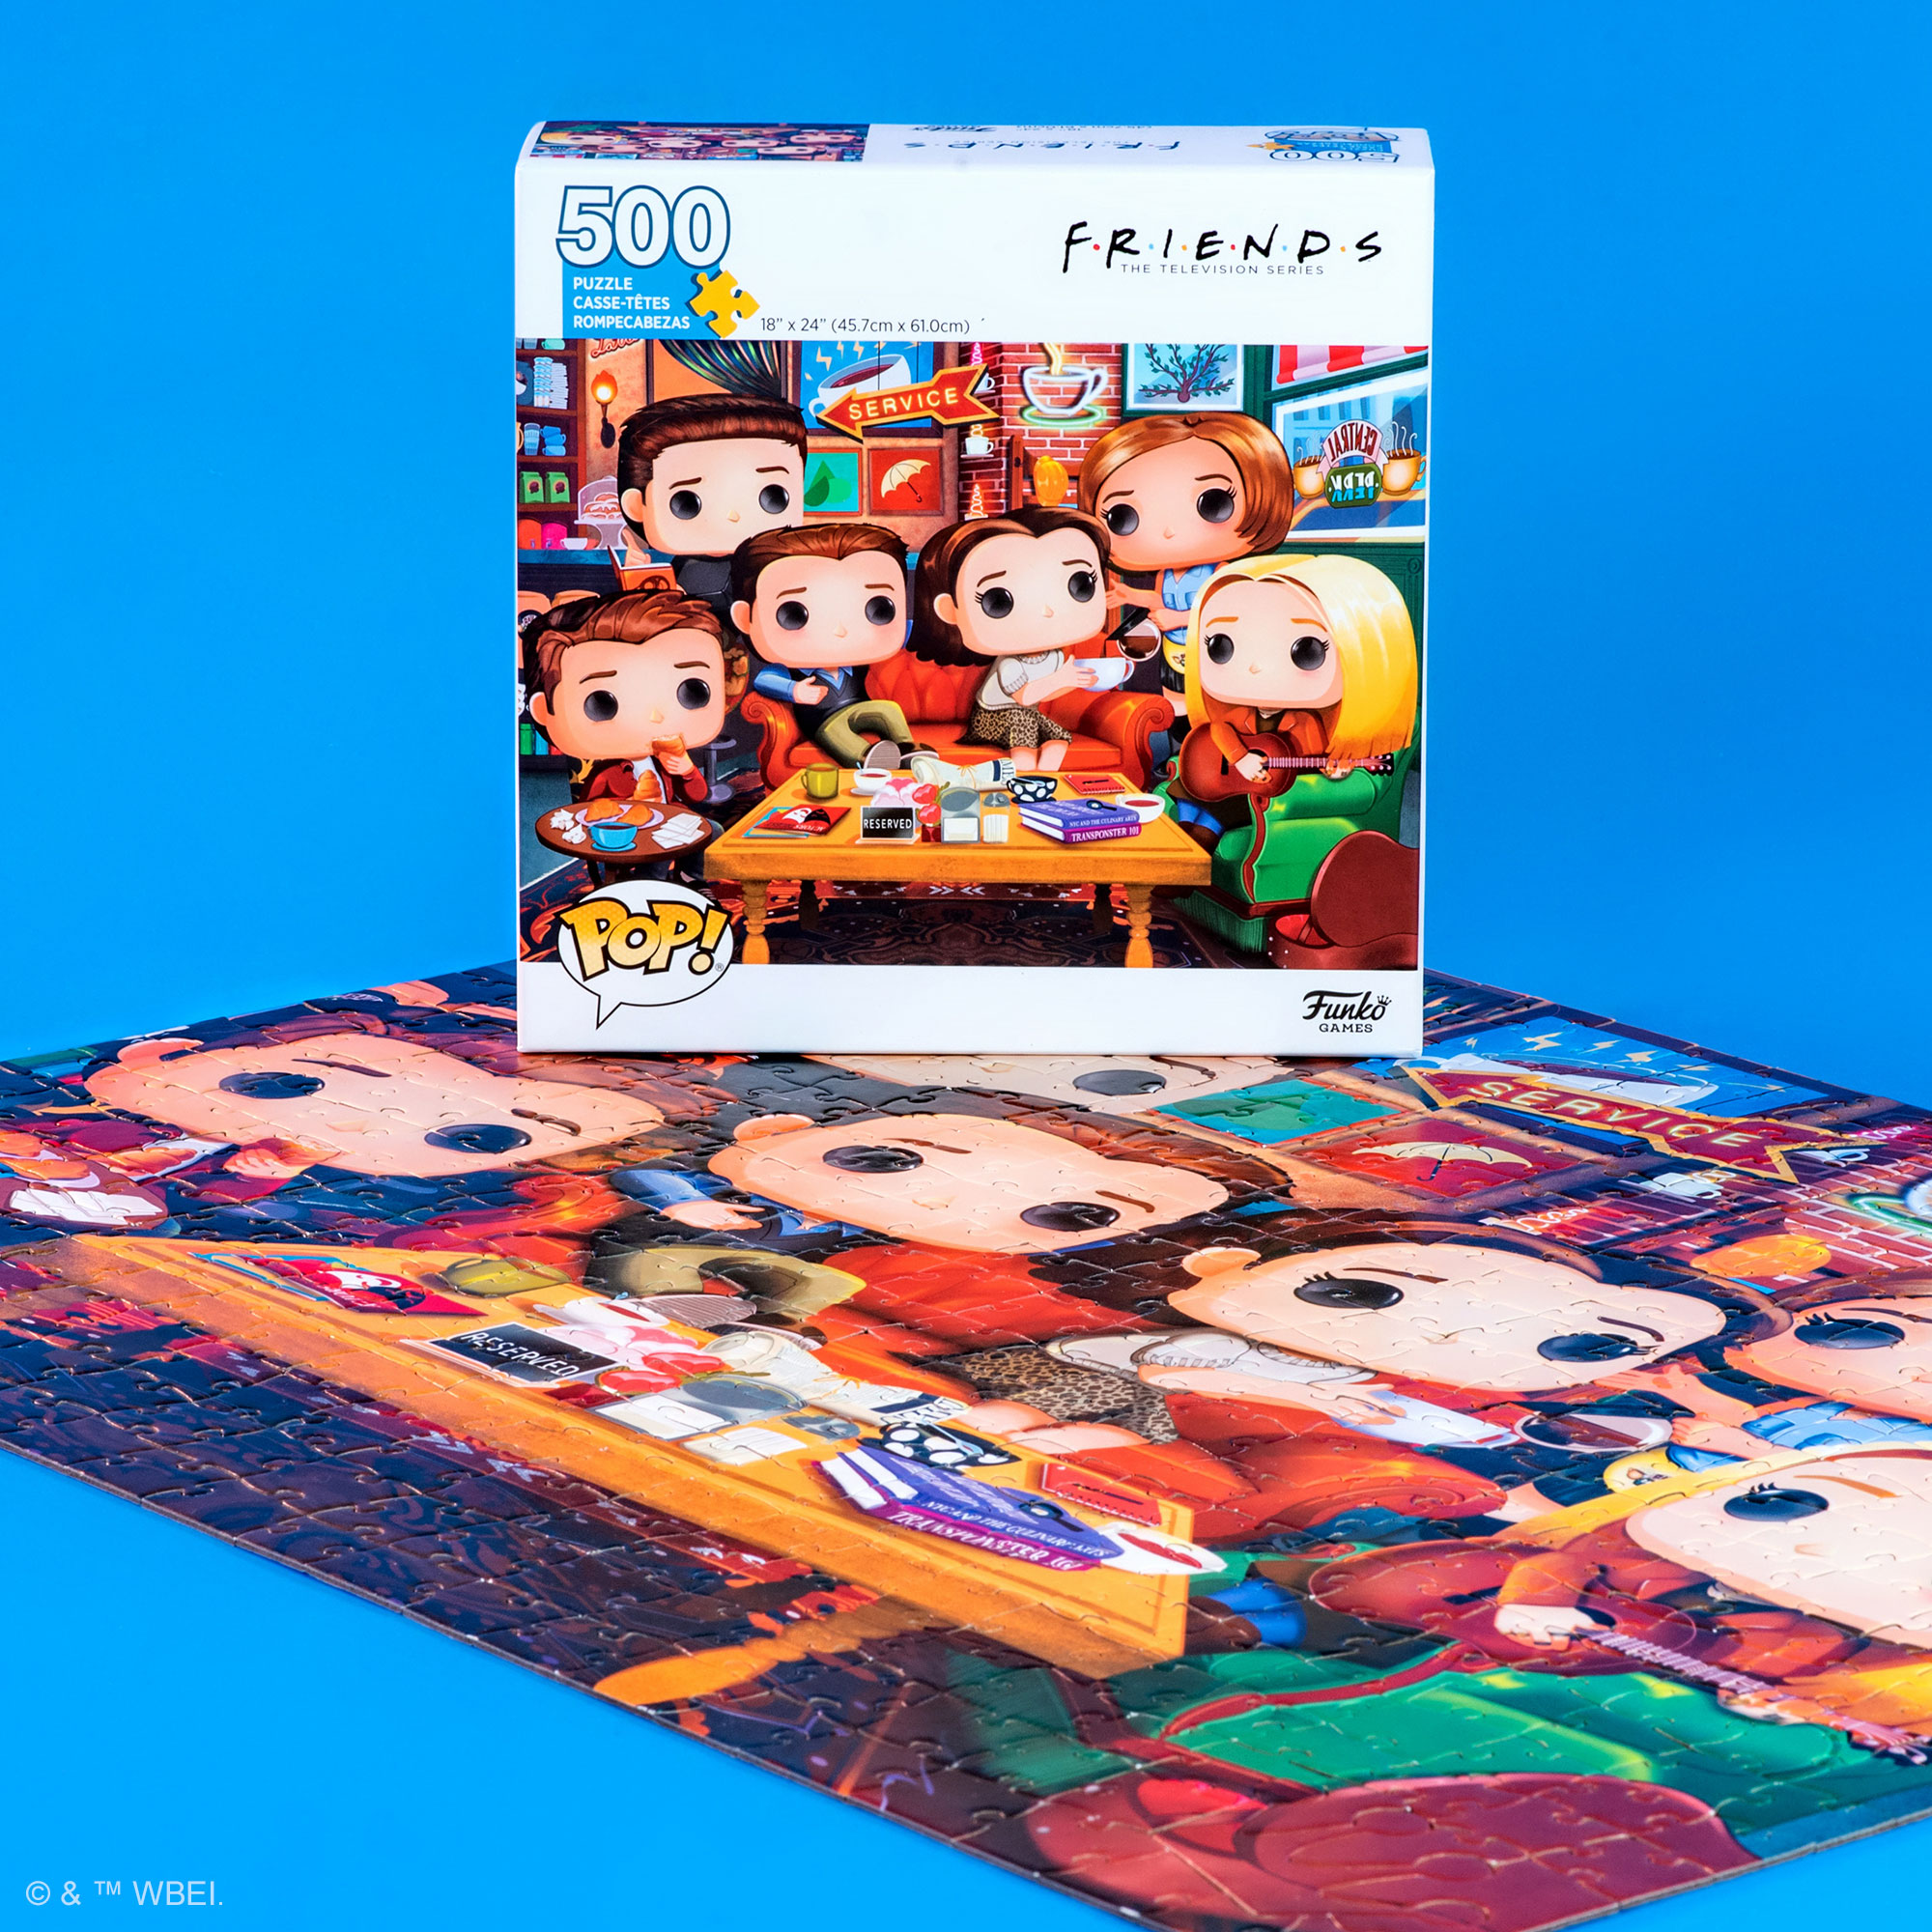 Buy Pop! Friends Puzzle at Funko.